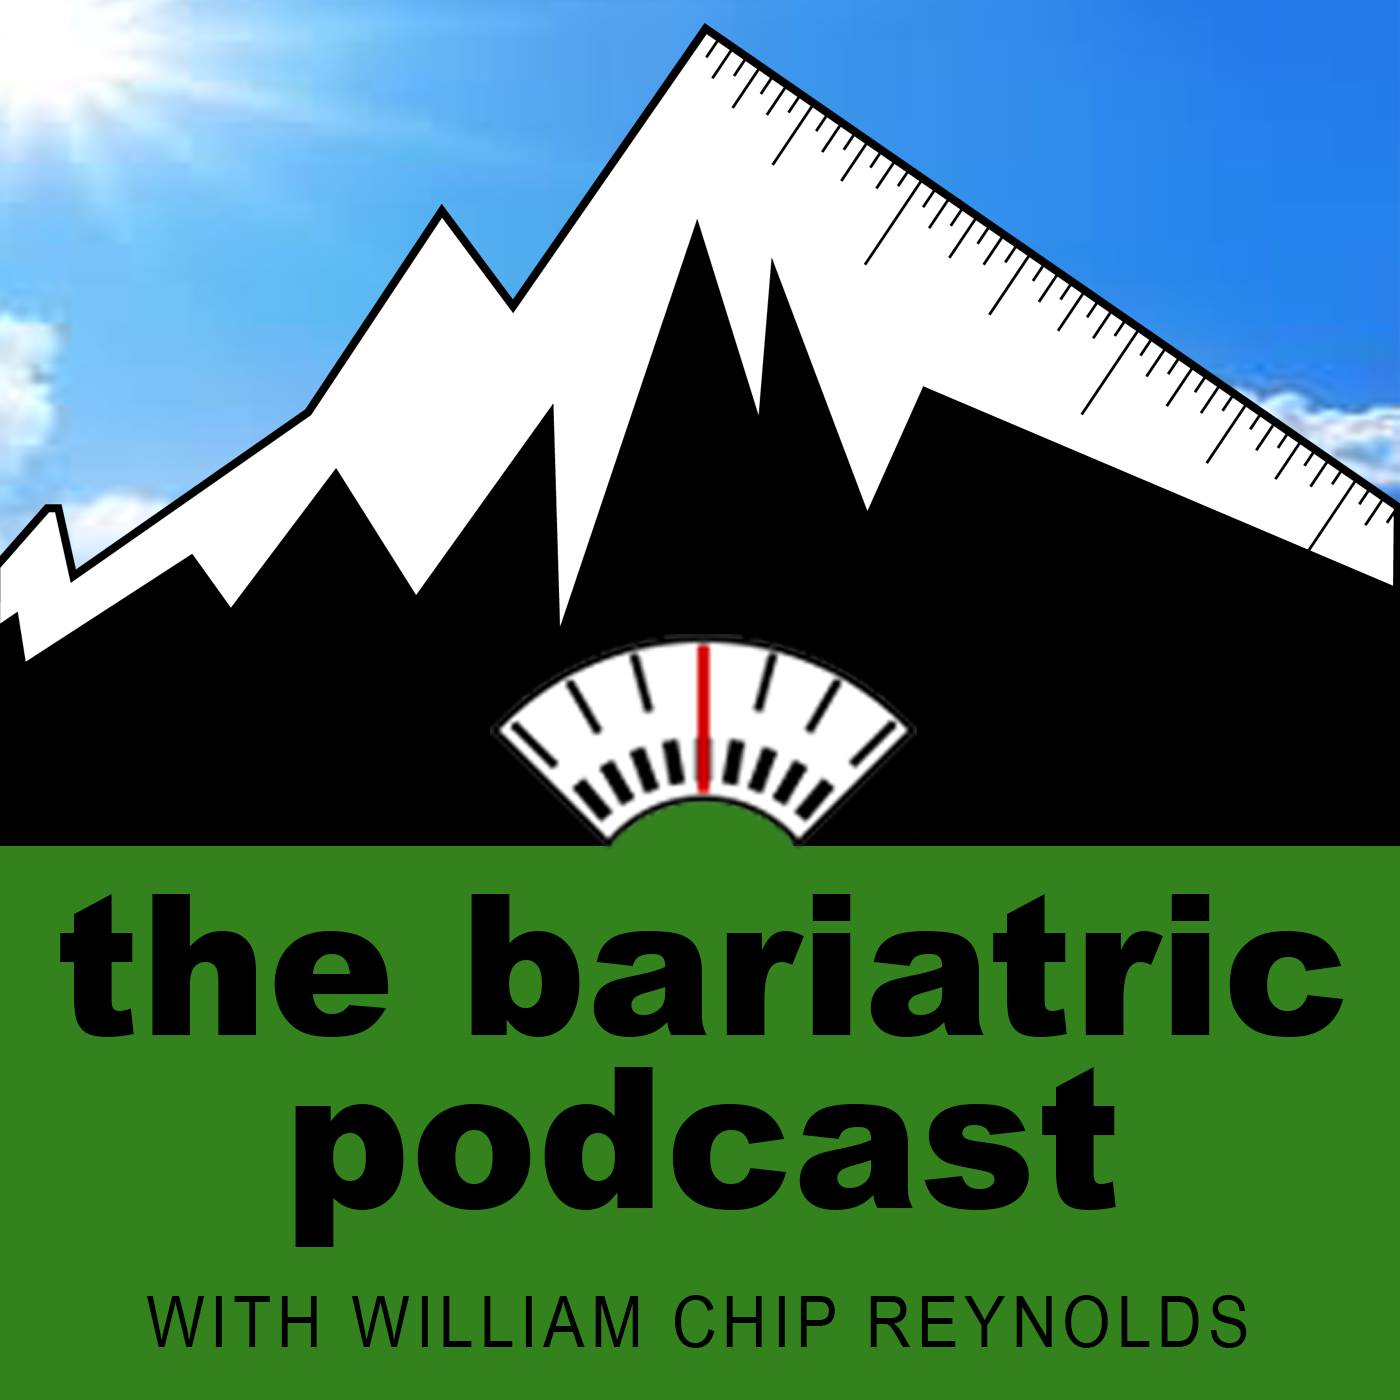 The Bariatric Podcast Episode Two